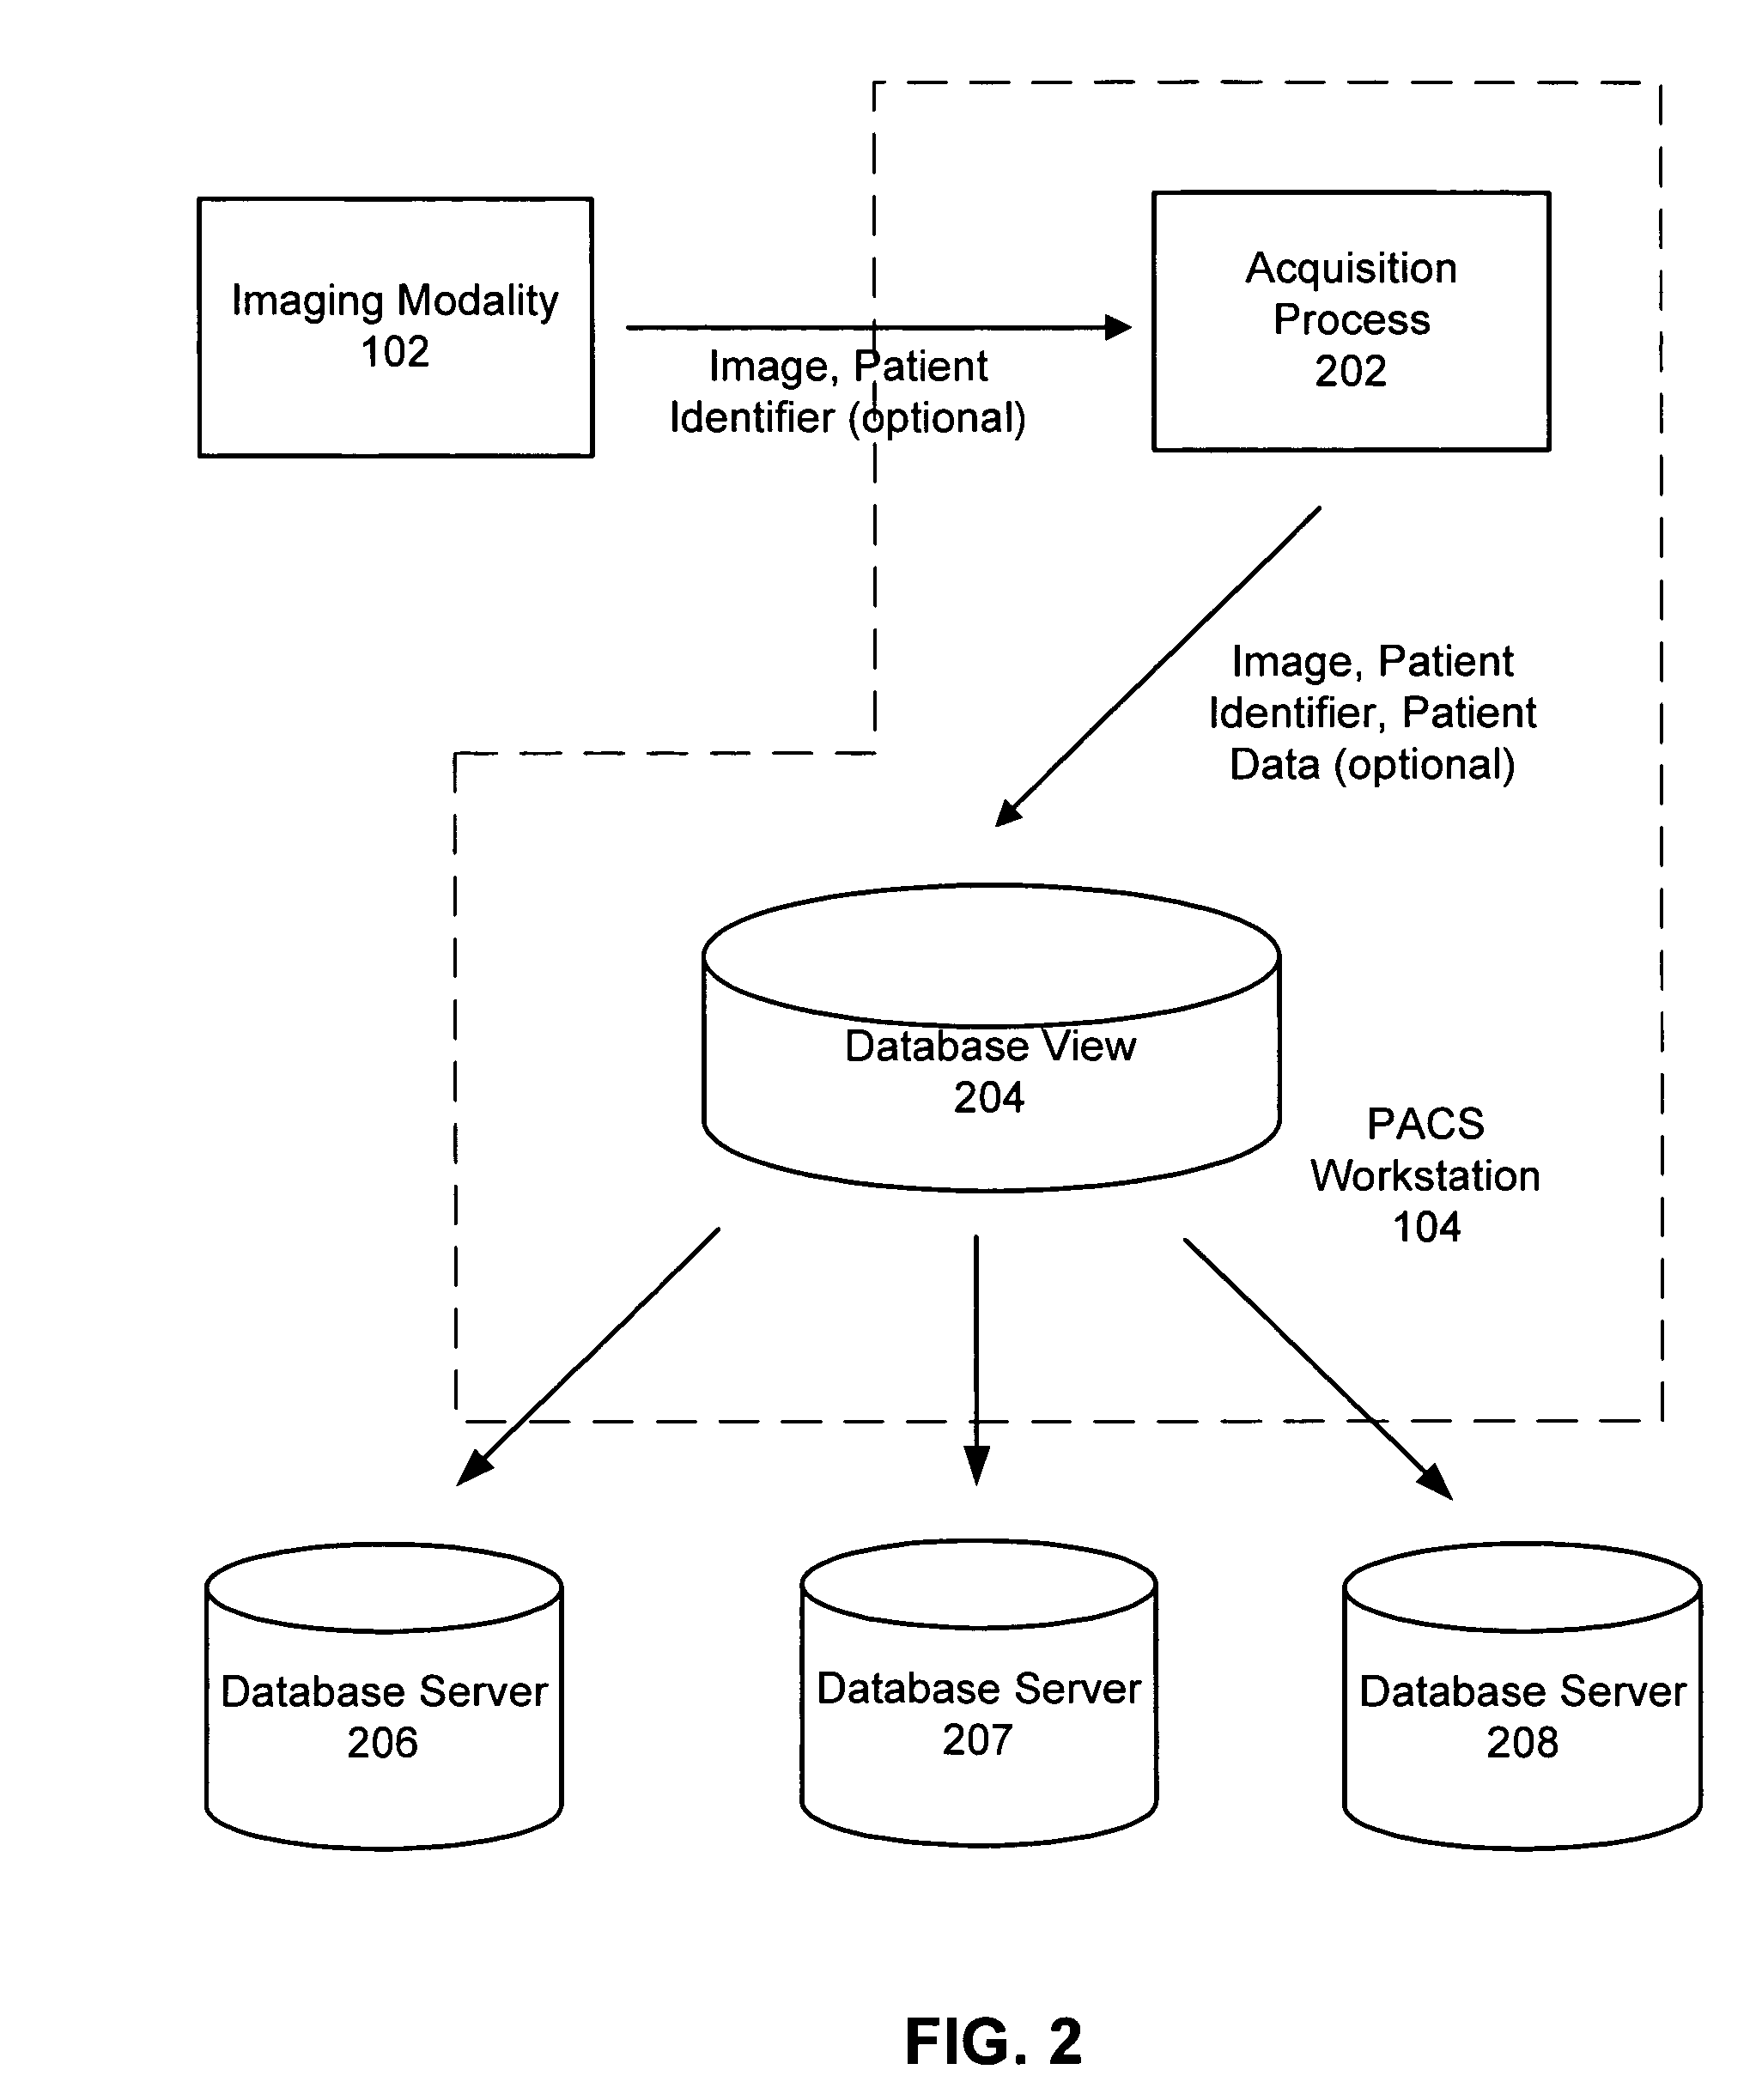 Transactional storage and workflow routing for medical image objects